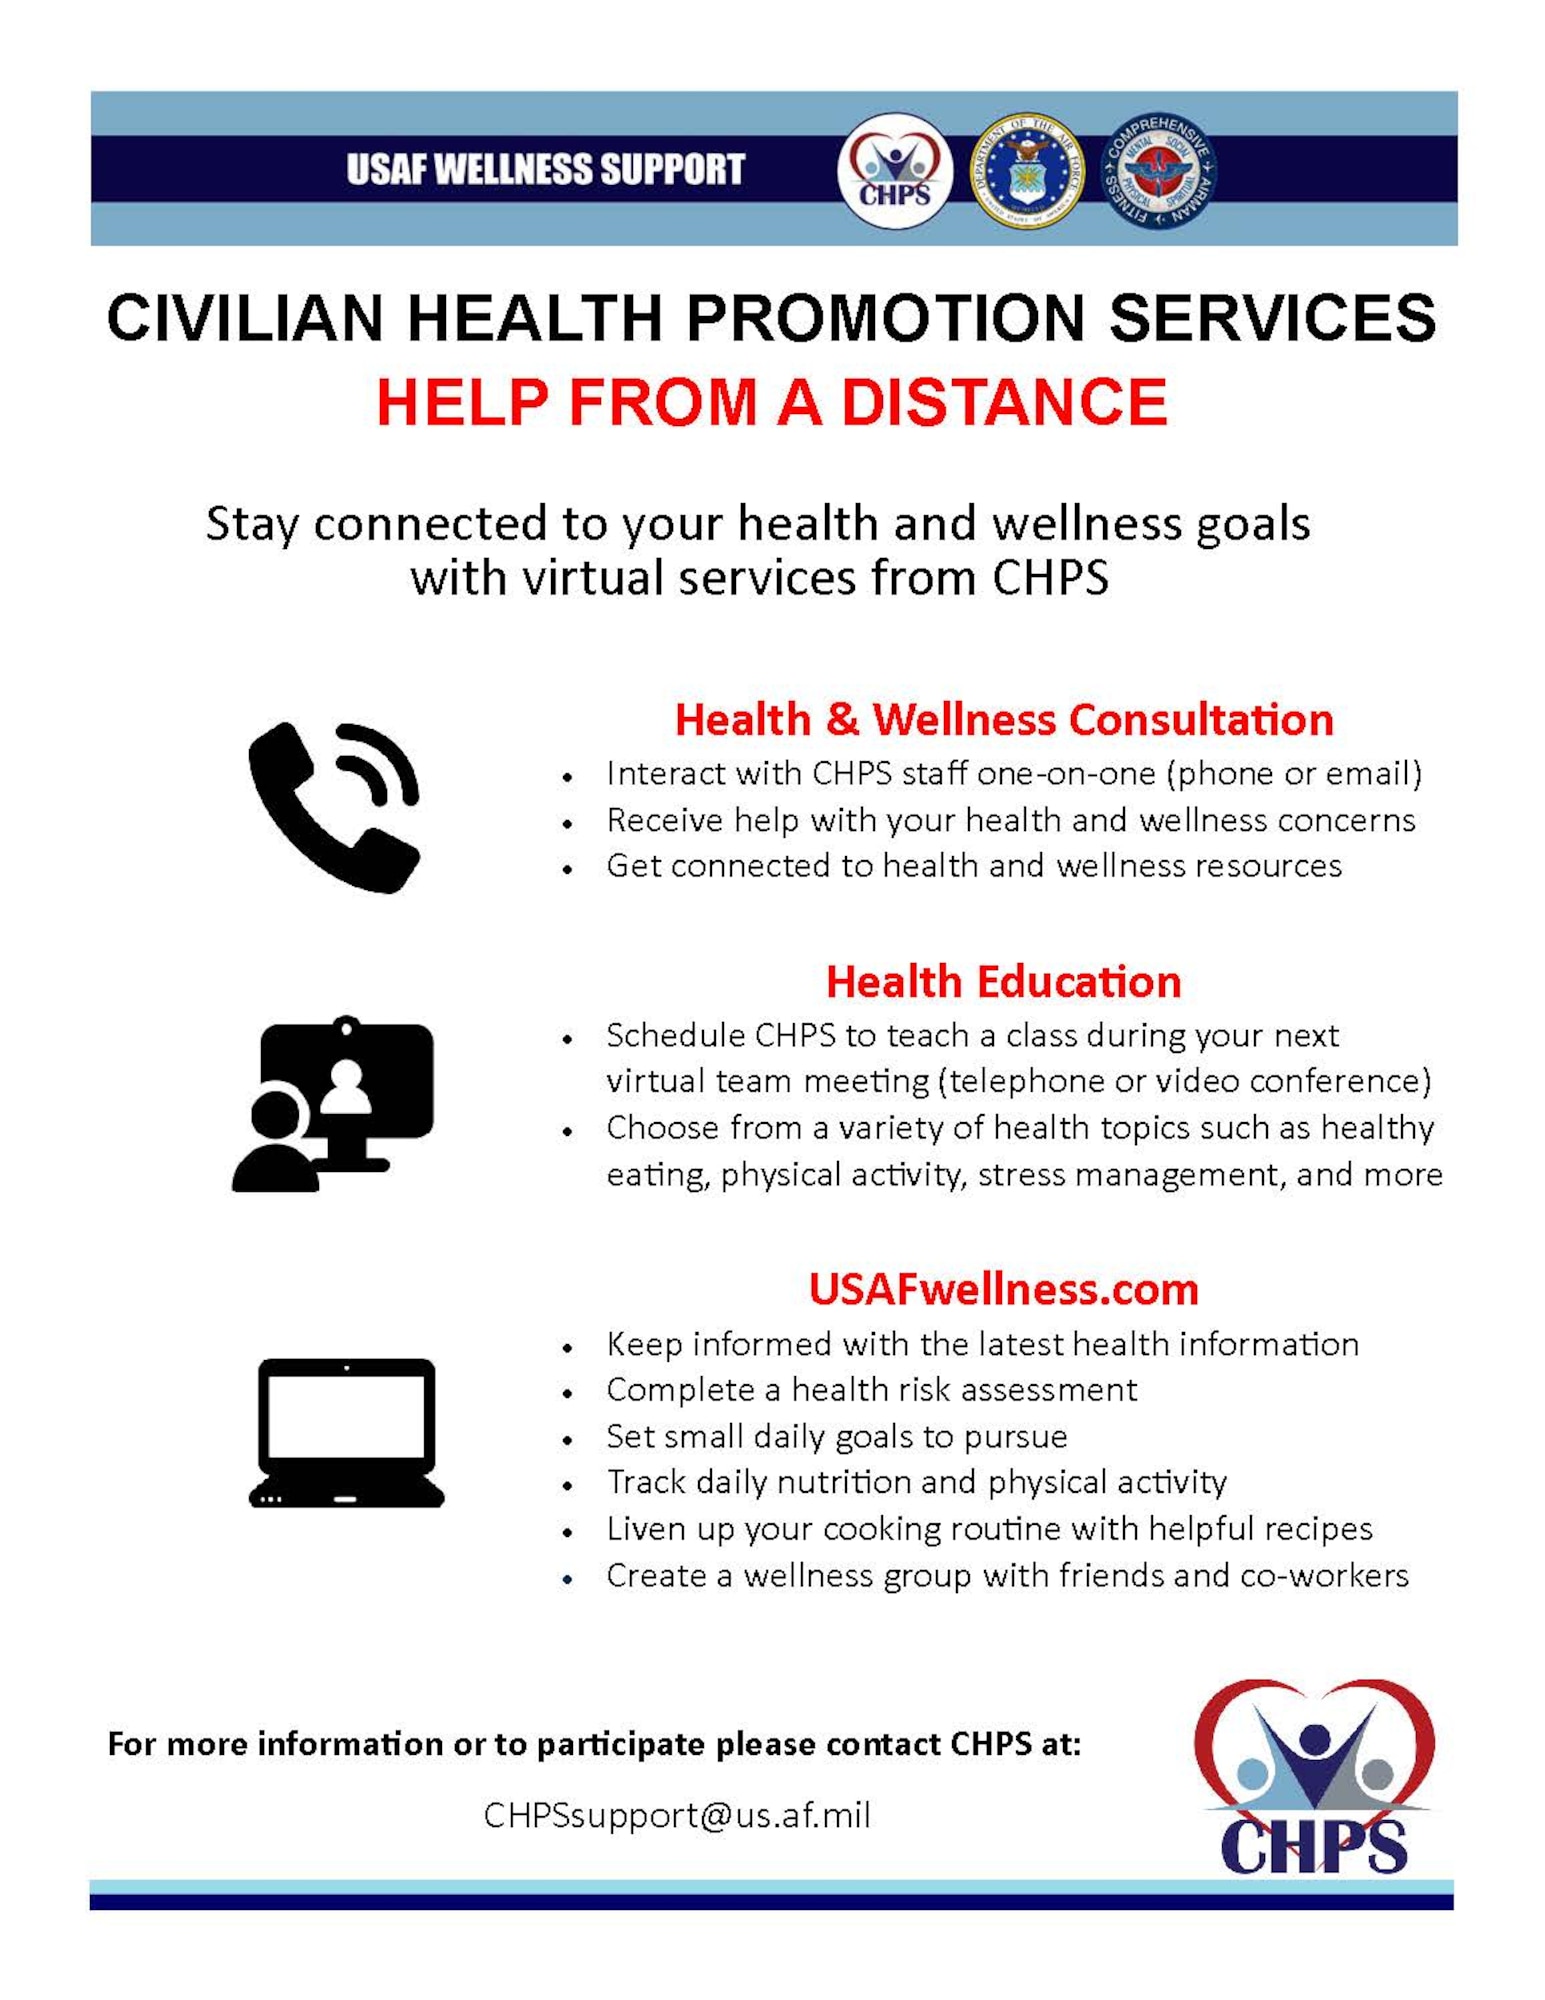 The Air Force Civilian Health Promotion Services is now offering virtual health and wellness resources to the workforce at www.USAFWellness.com.